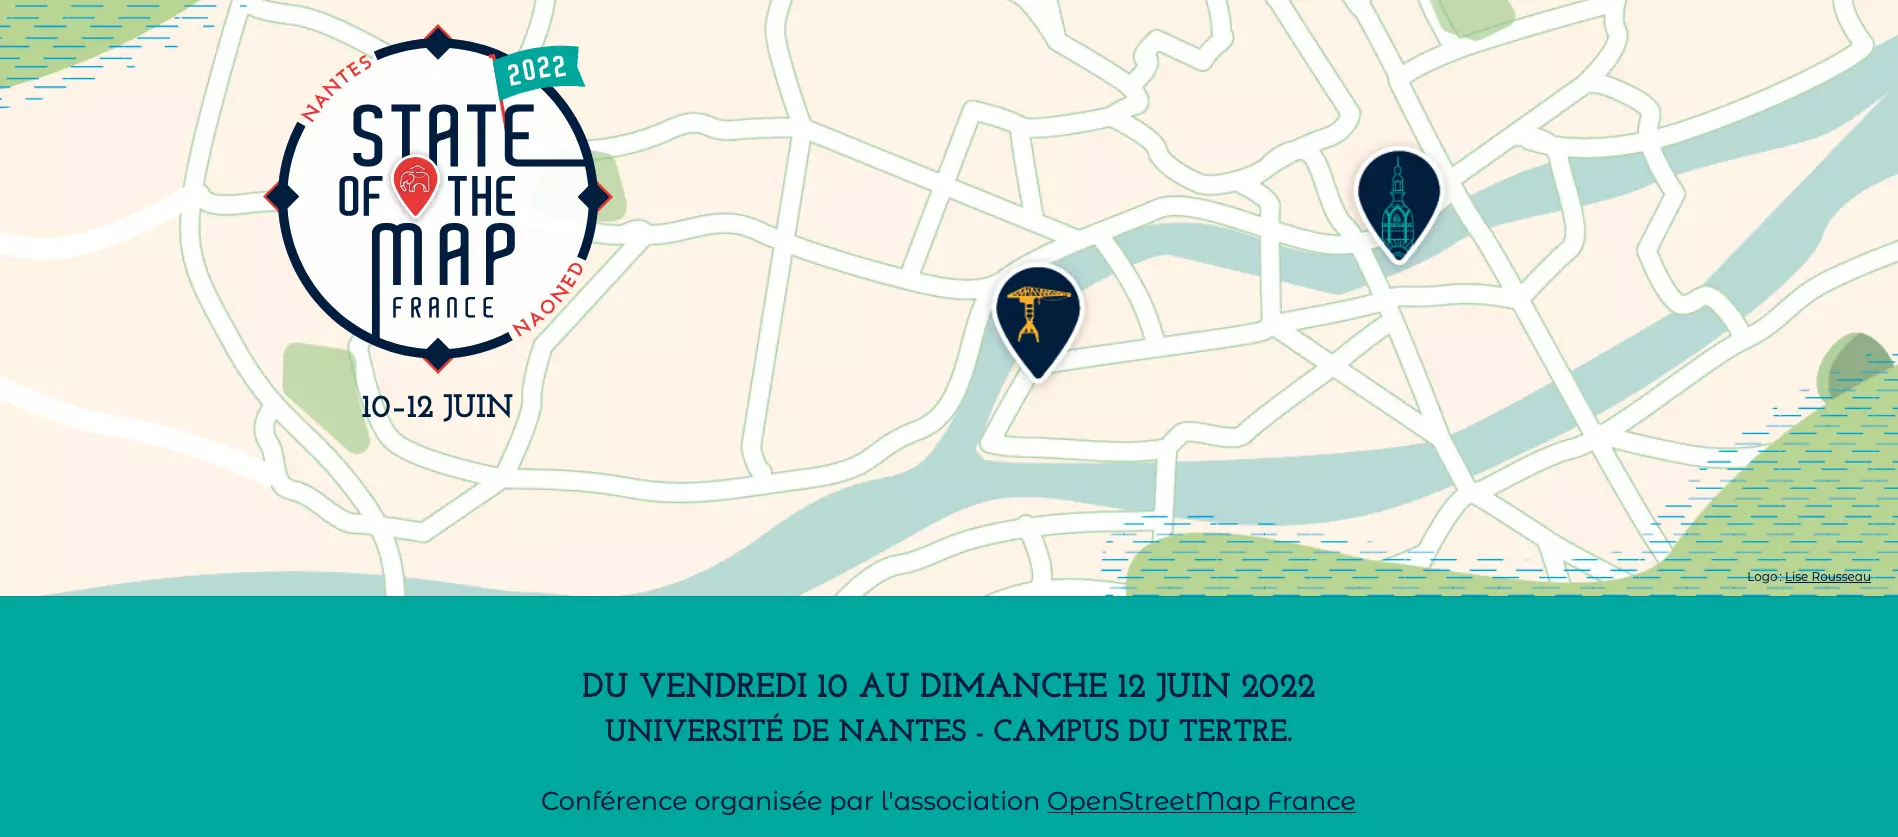 State of the Map France Nantes 2022